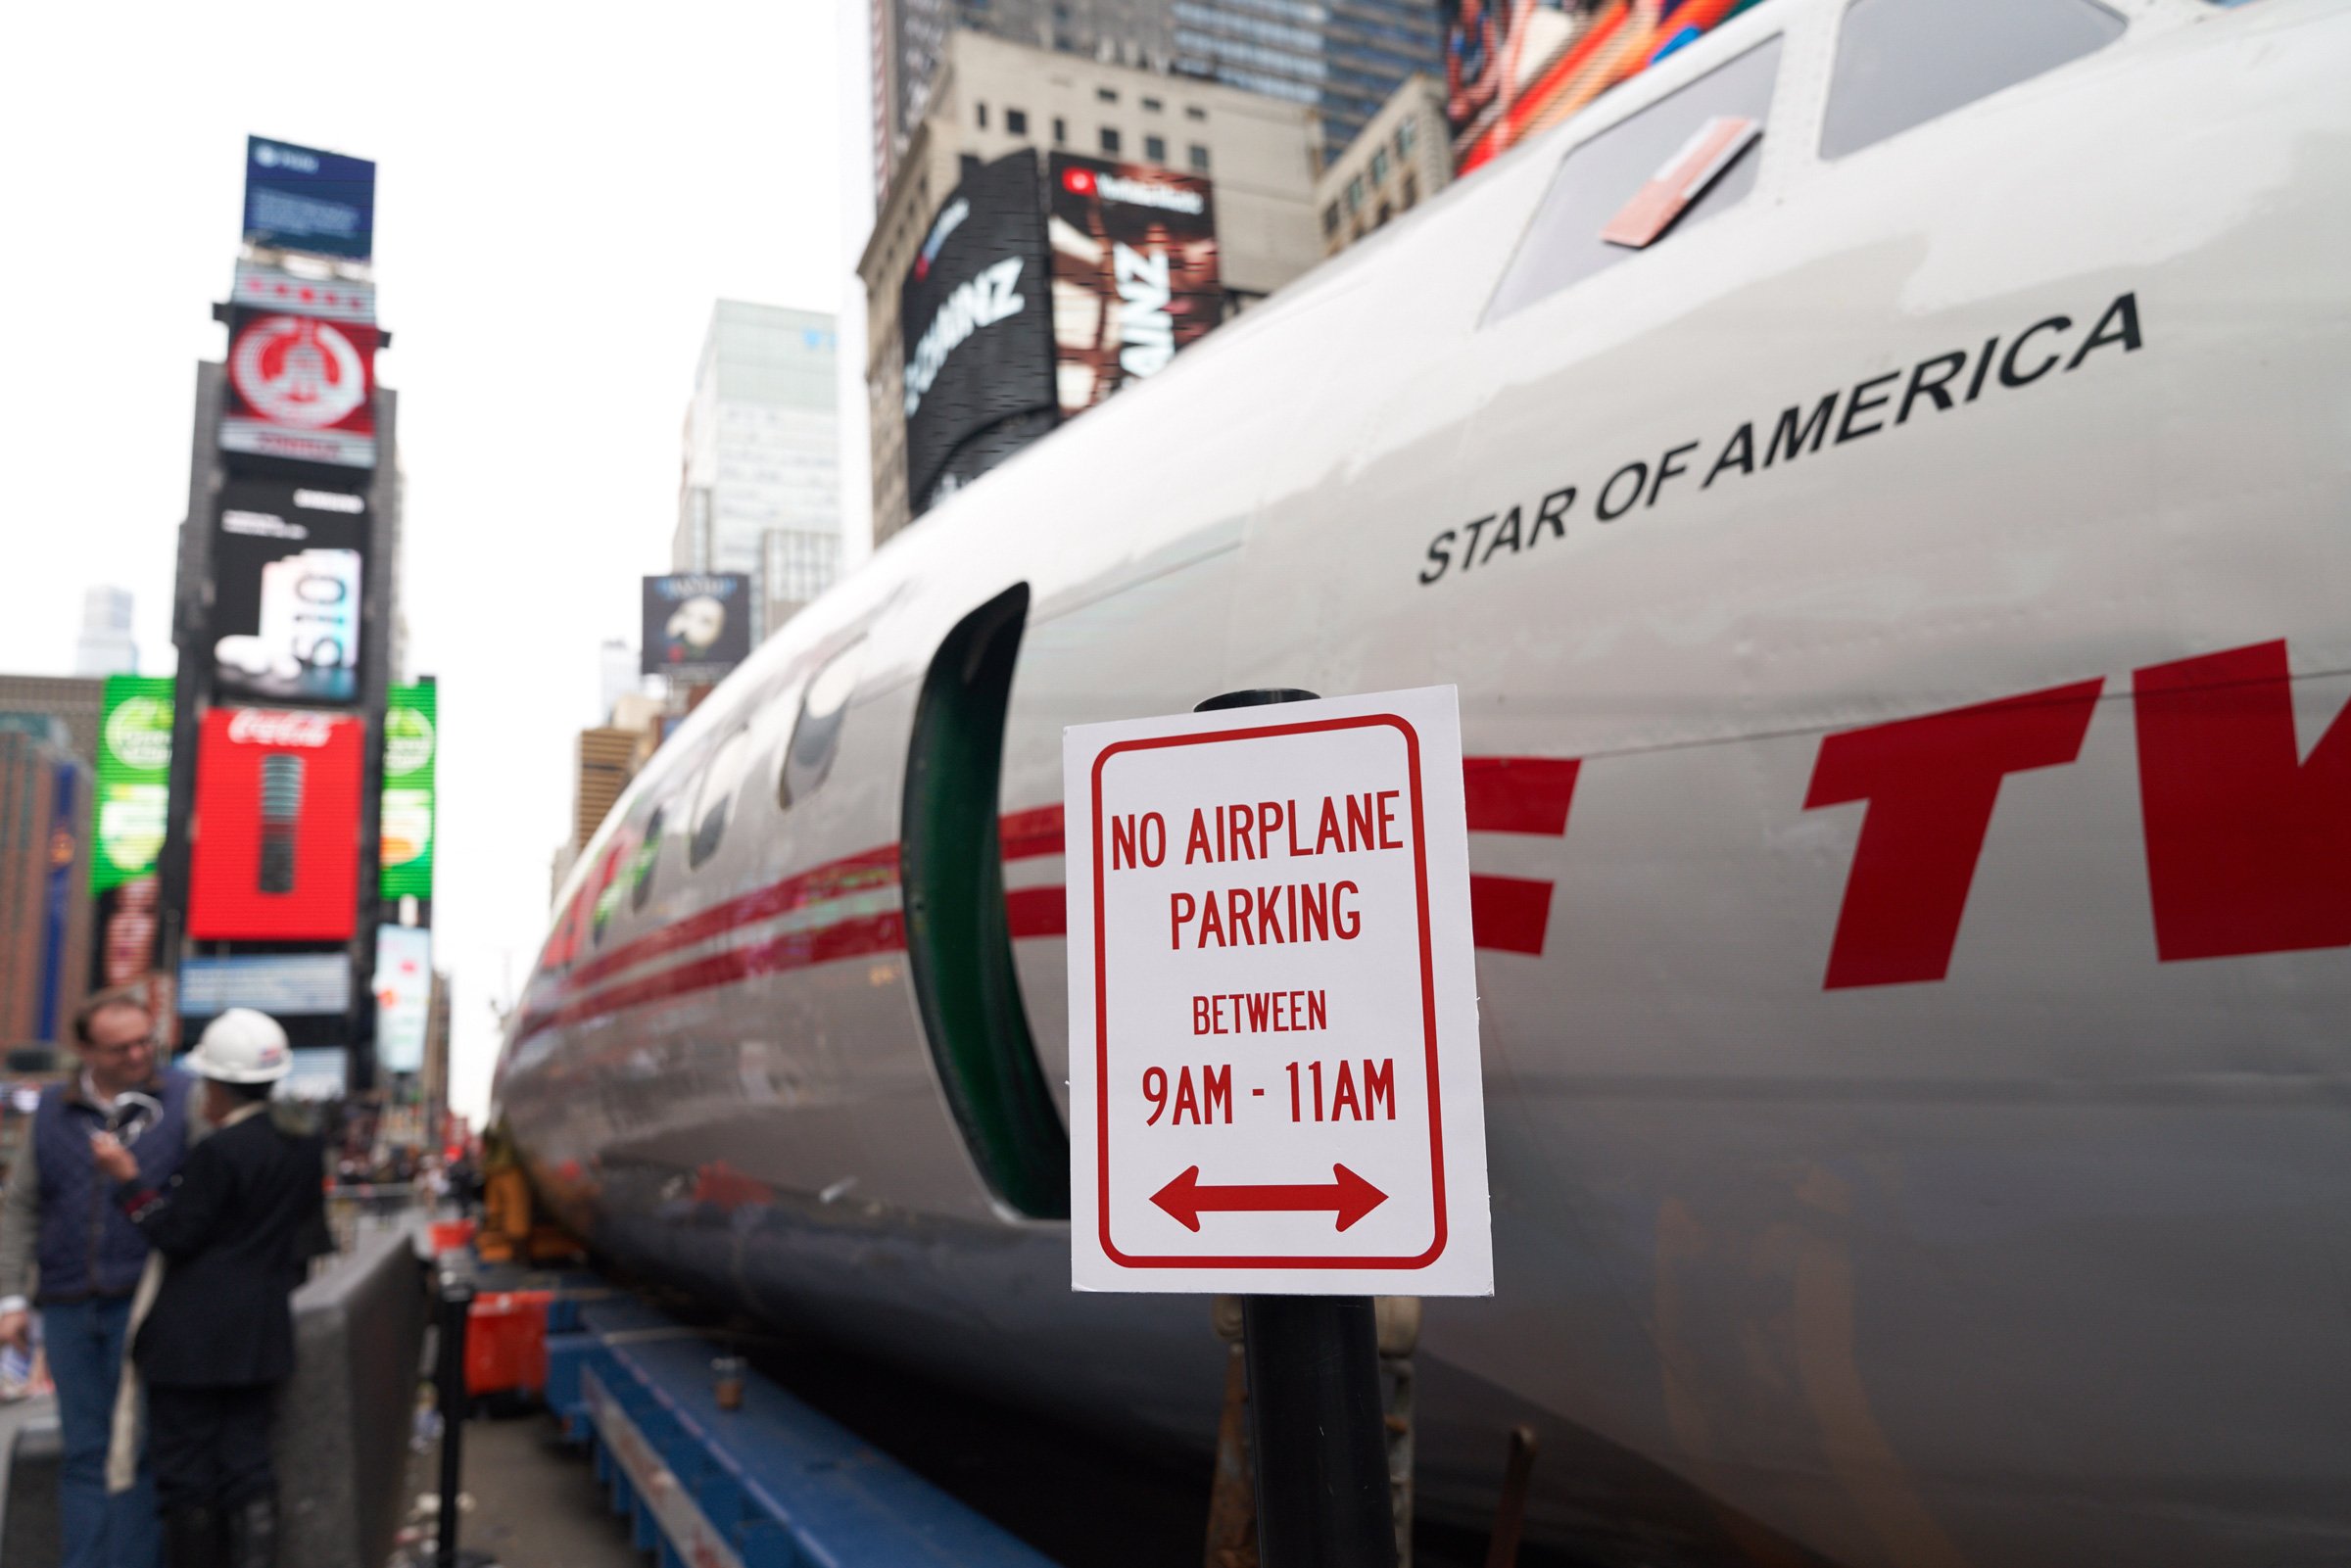 Like many New Yorkers, Connie flouted a no-parking sign in Times Square — and landed herself a (faux) ticket on March 24, 2019.